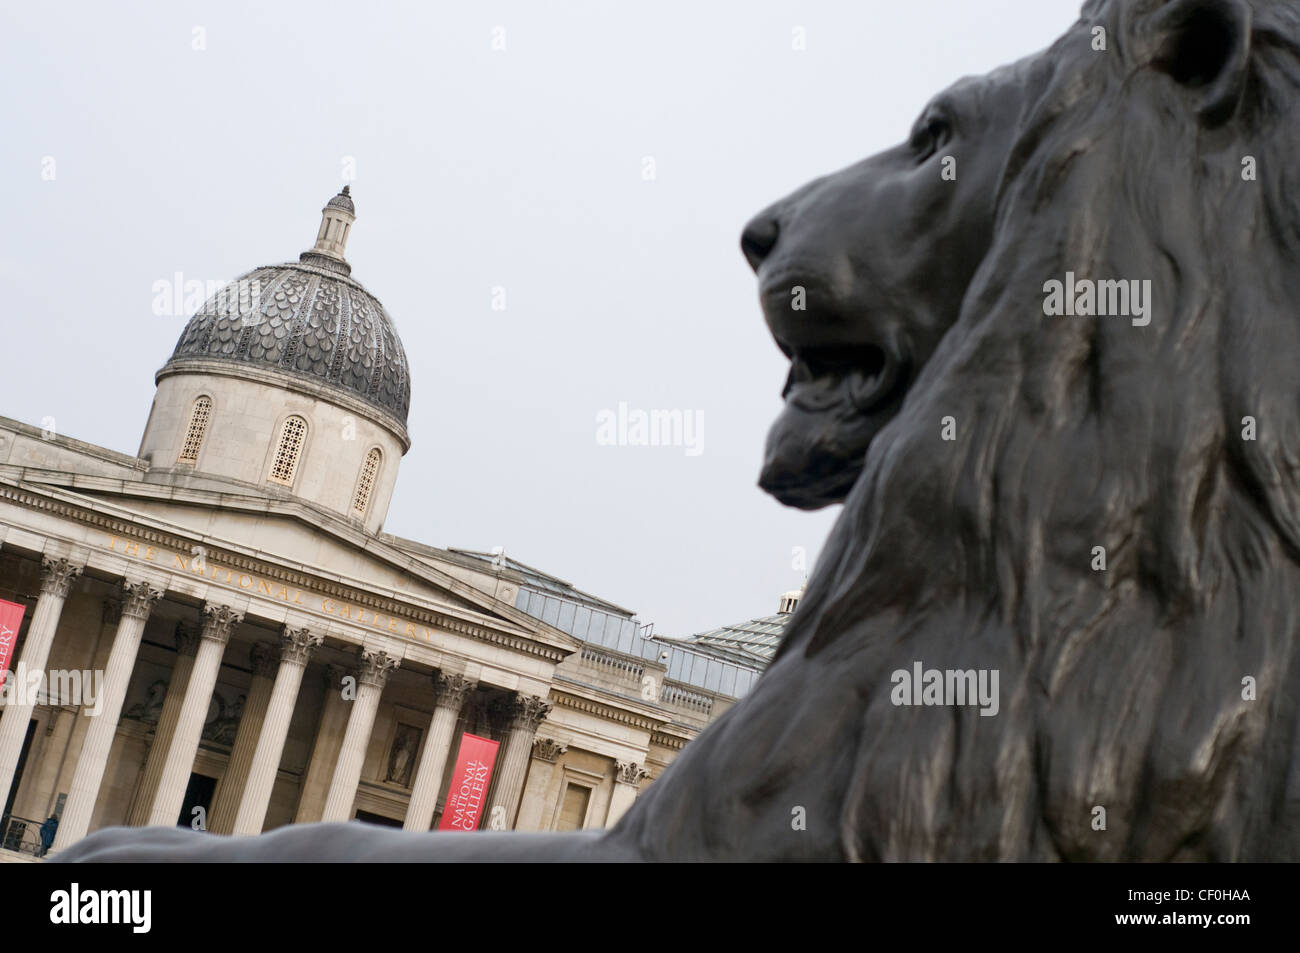 One of the lions in Trafalgar Square, London, England, UK, with the National Gallery in the background Stock Photo